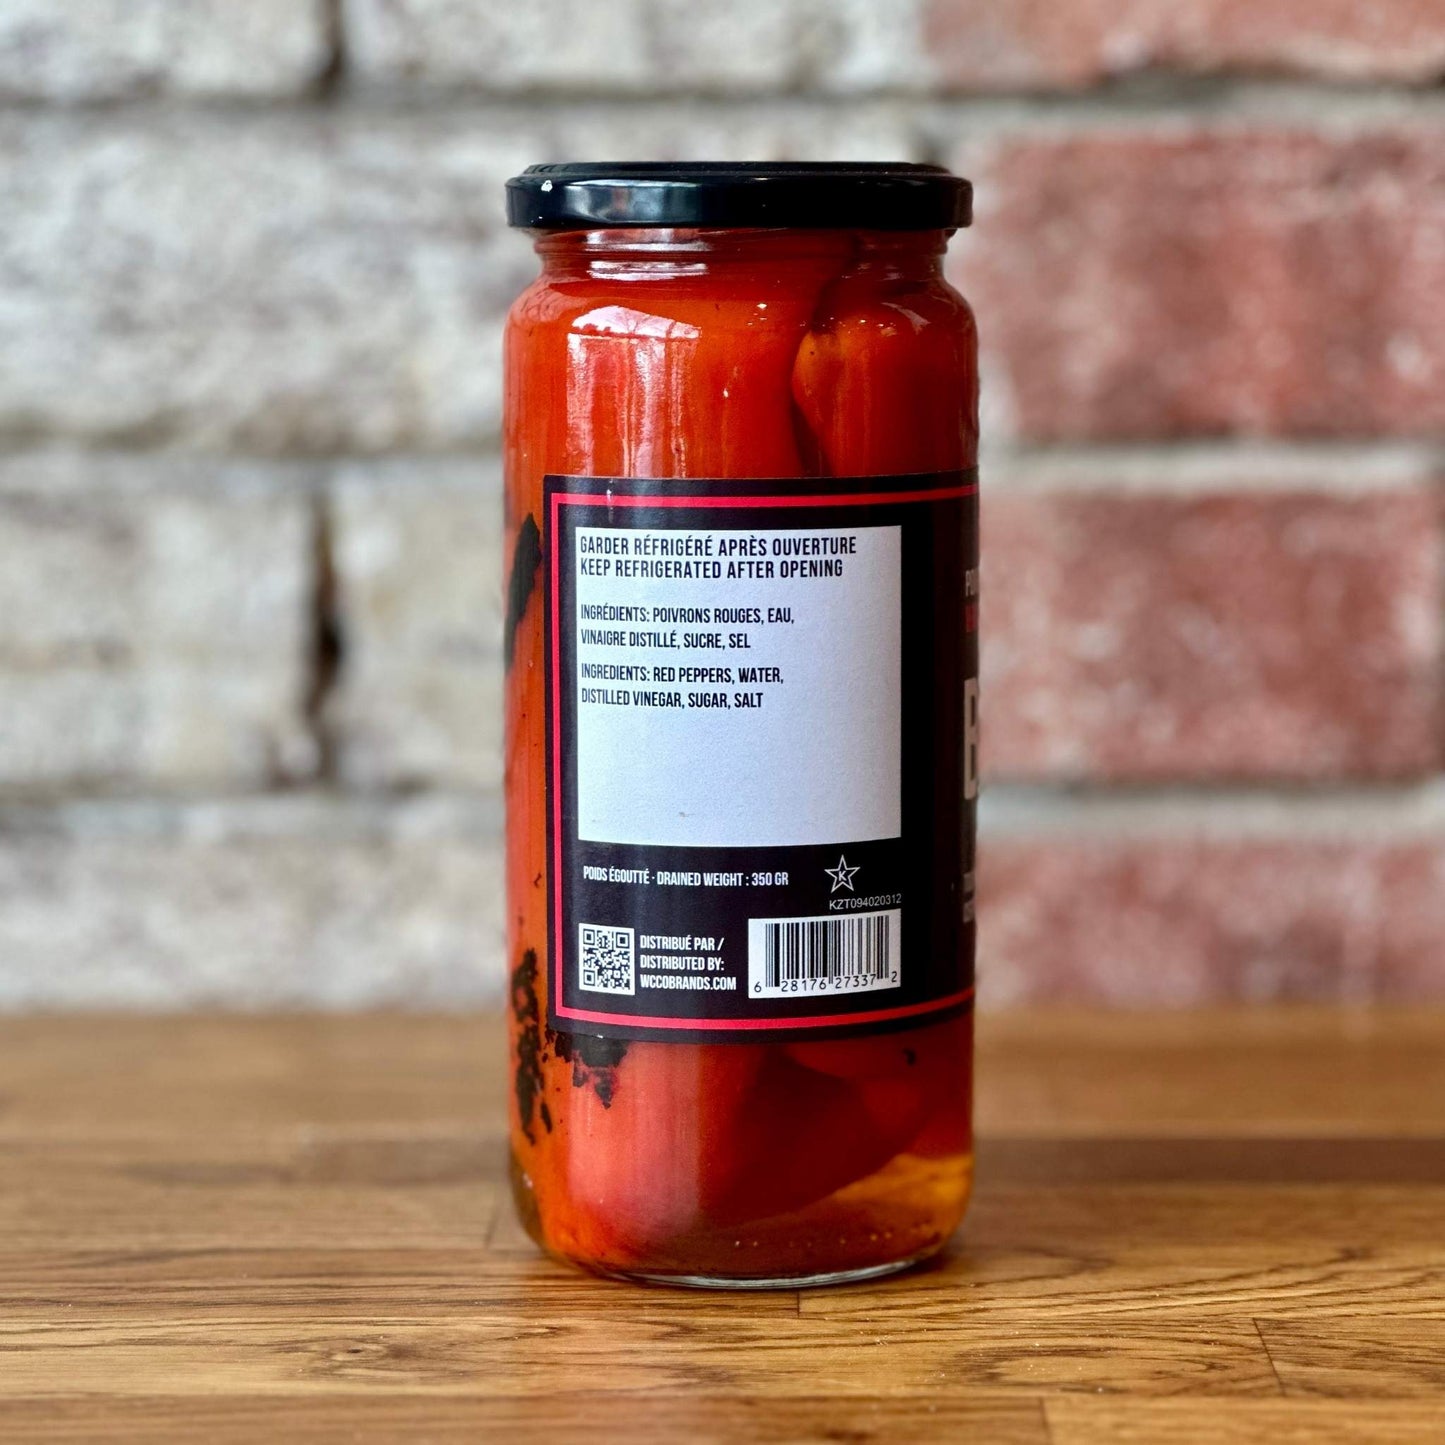 Whole Roasted Red Peppers 500ml -Brine Co